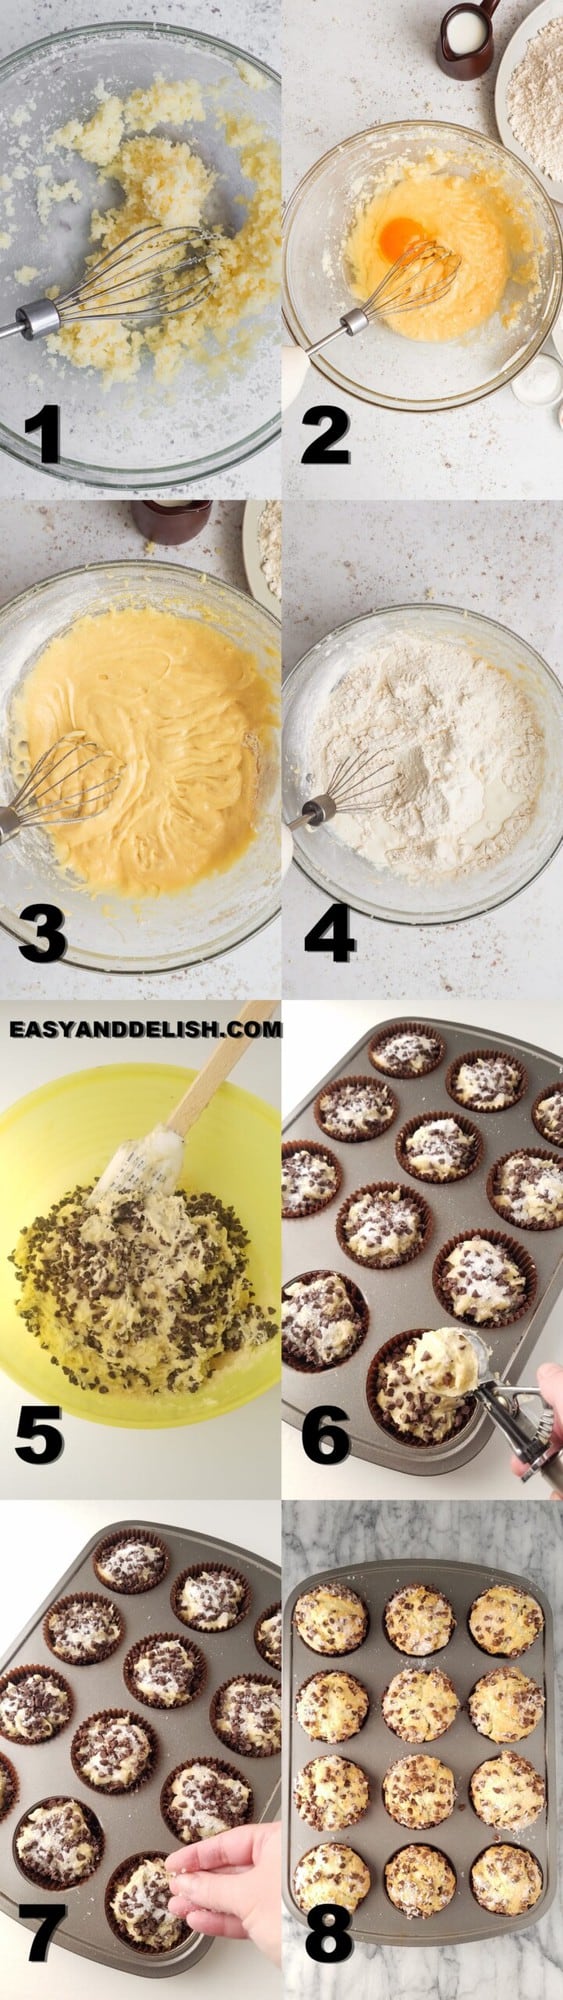 photo collage showing how to make chocolate chip muffins 